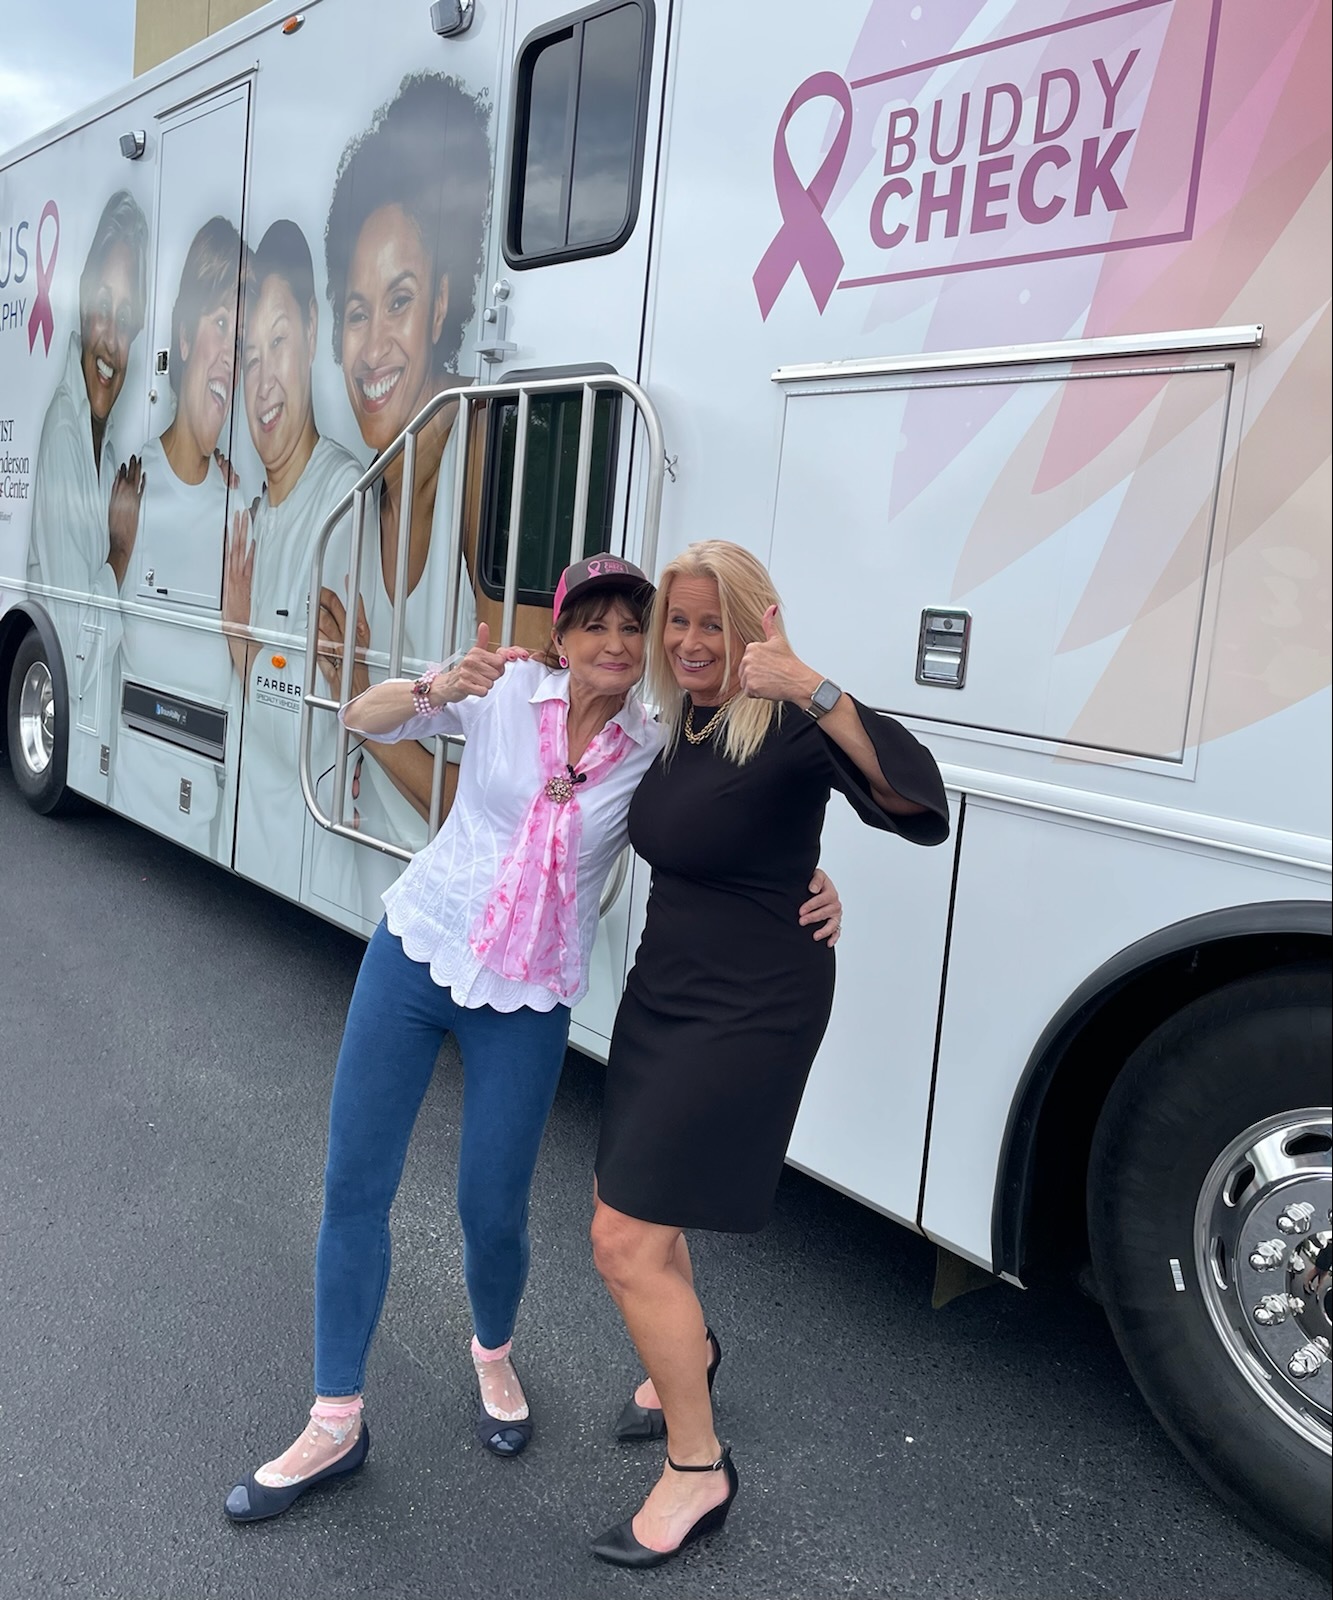 Duval County Judge Kimberly Sadler, right, with First Coast News anchor Jeannie Blaylock and the Buddy Bus 3D mobile mammography vehicle.